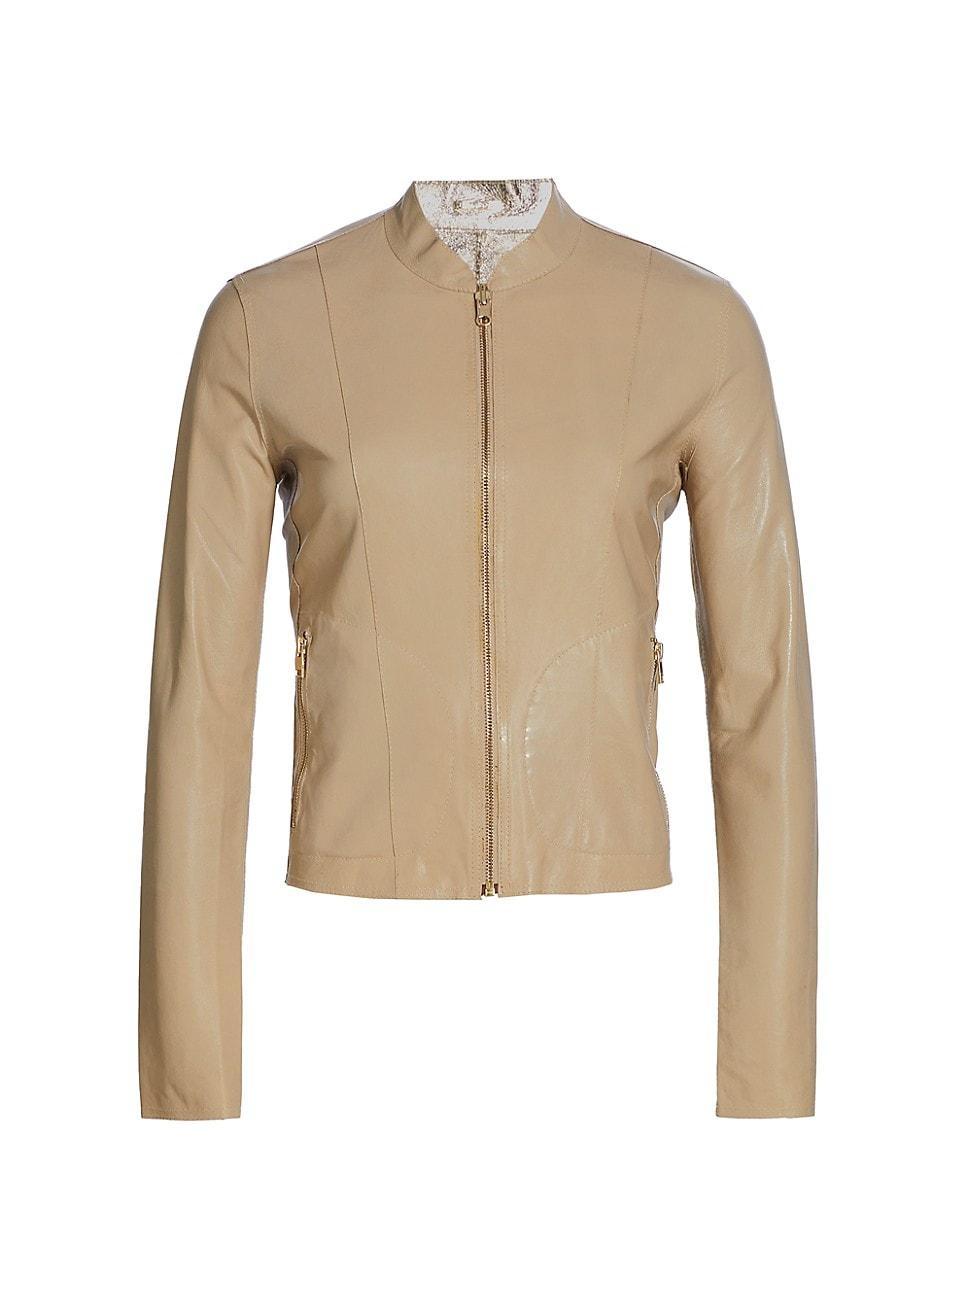 Womens Chapin Reversible Leather Jacket Product Image